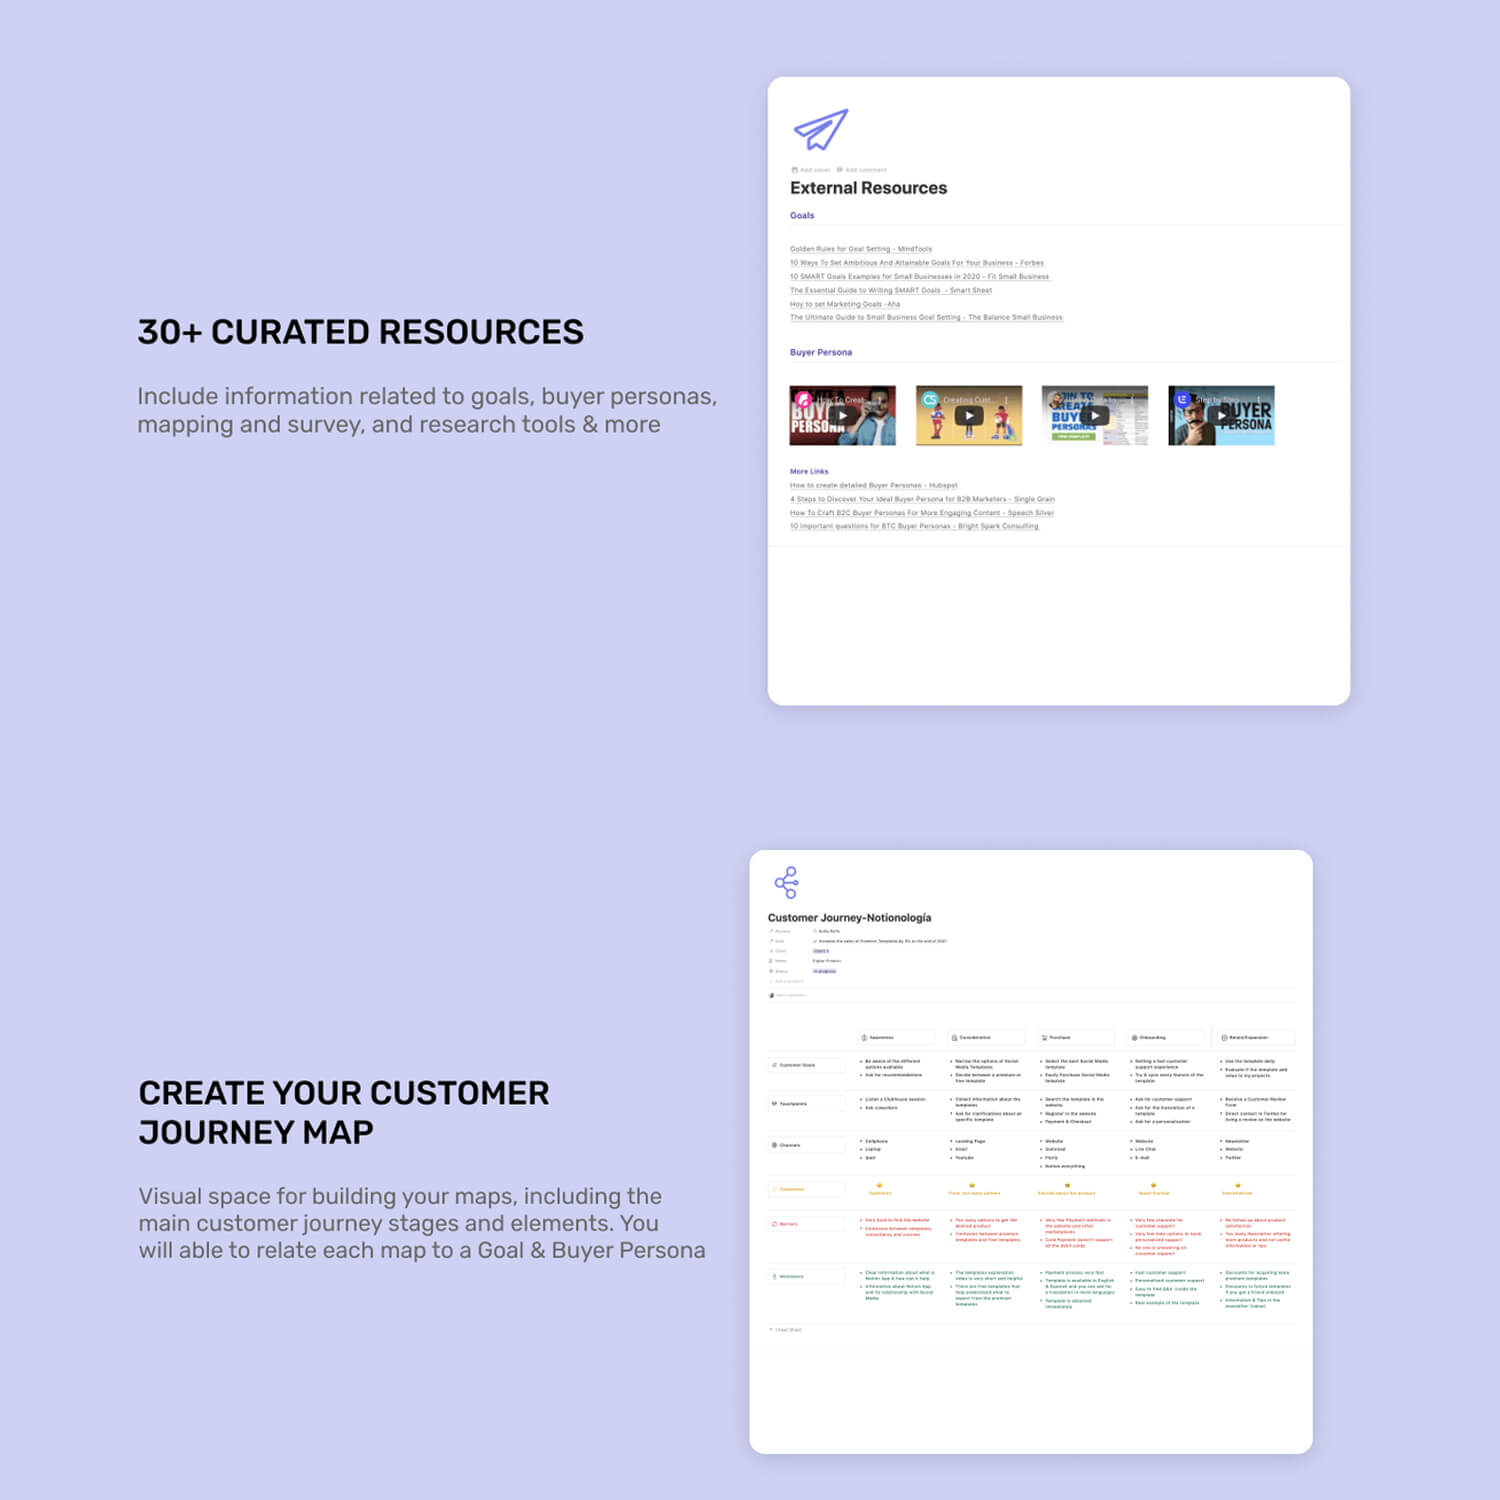 30+ Curated resources, Create your customer journey map.